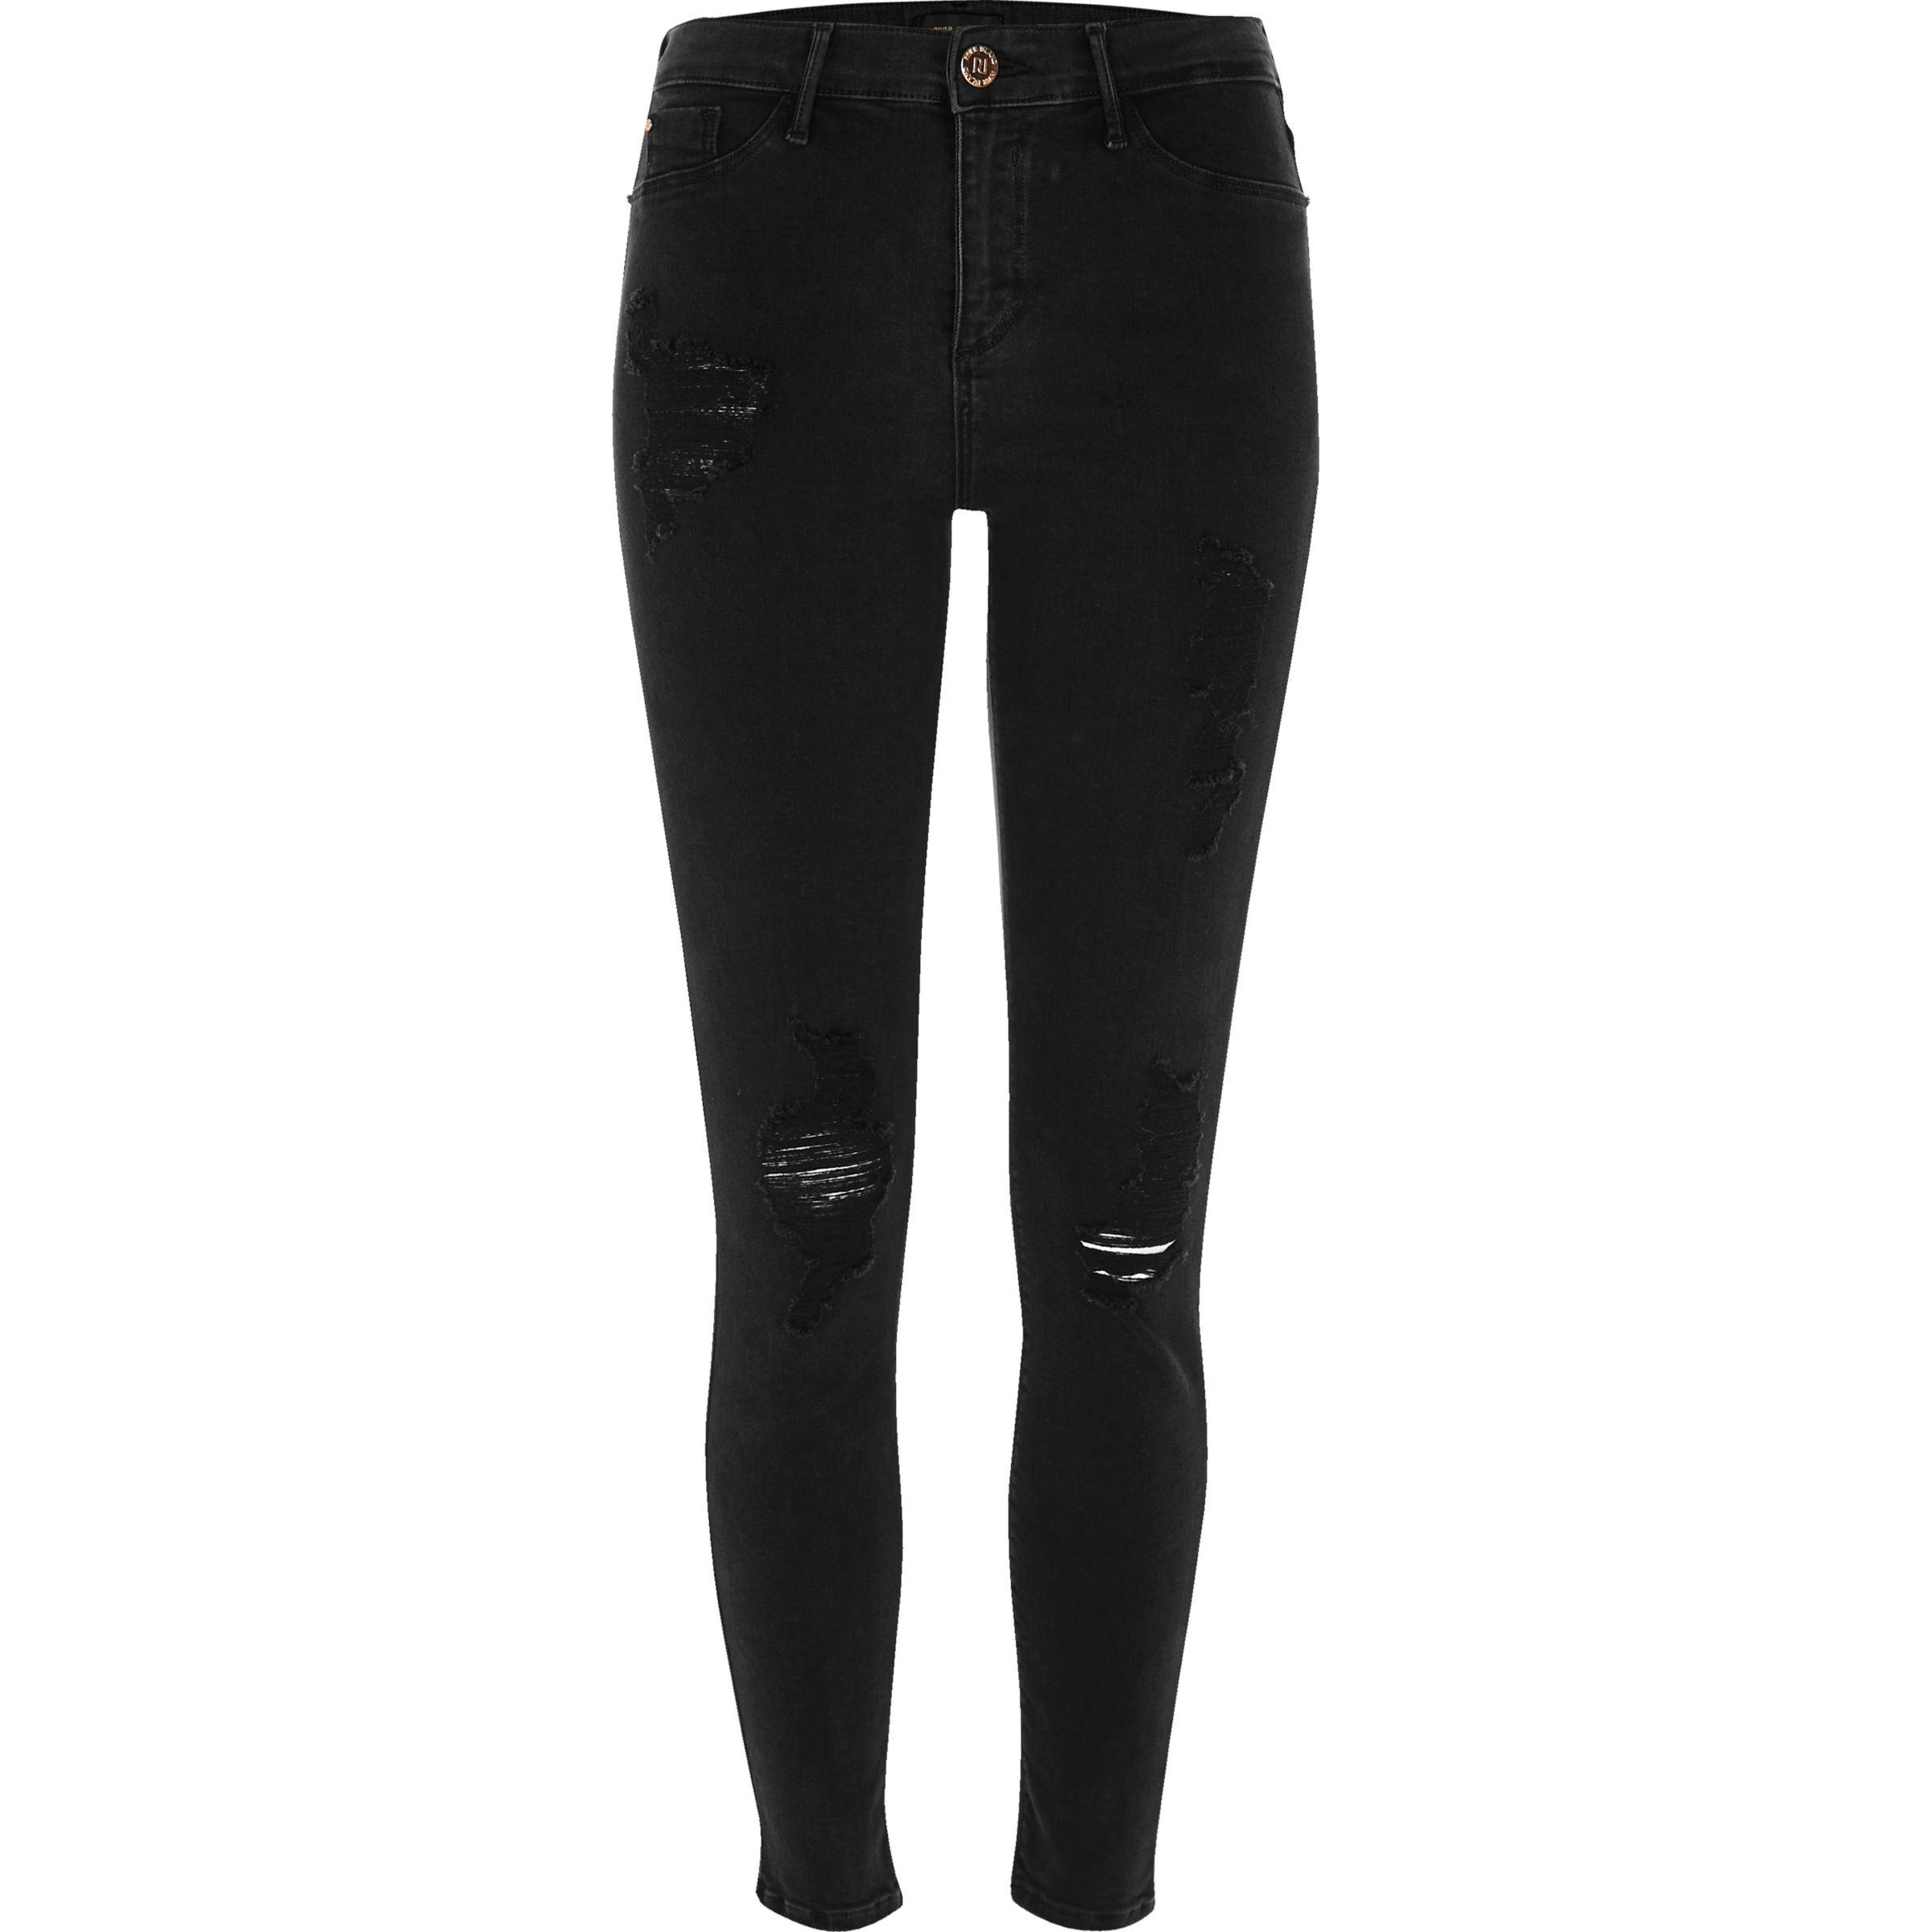 Lyst - River Island Black Washed Molly Ripped Jeggings in Black